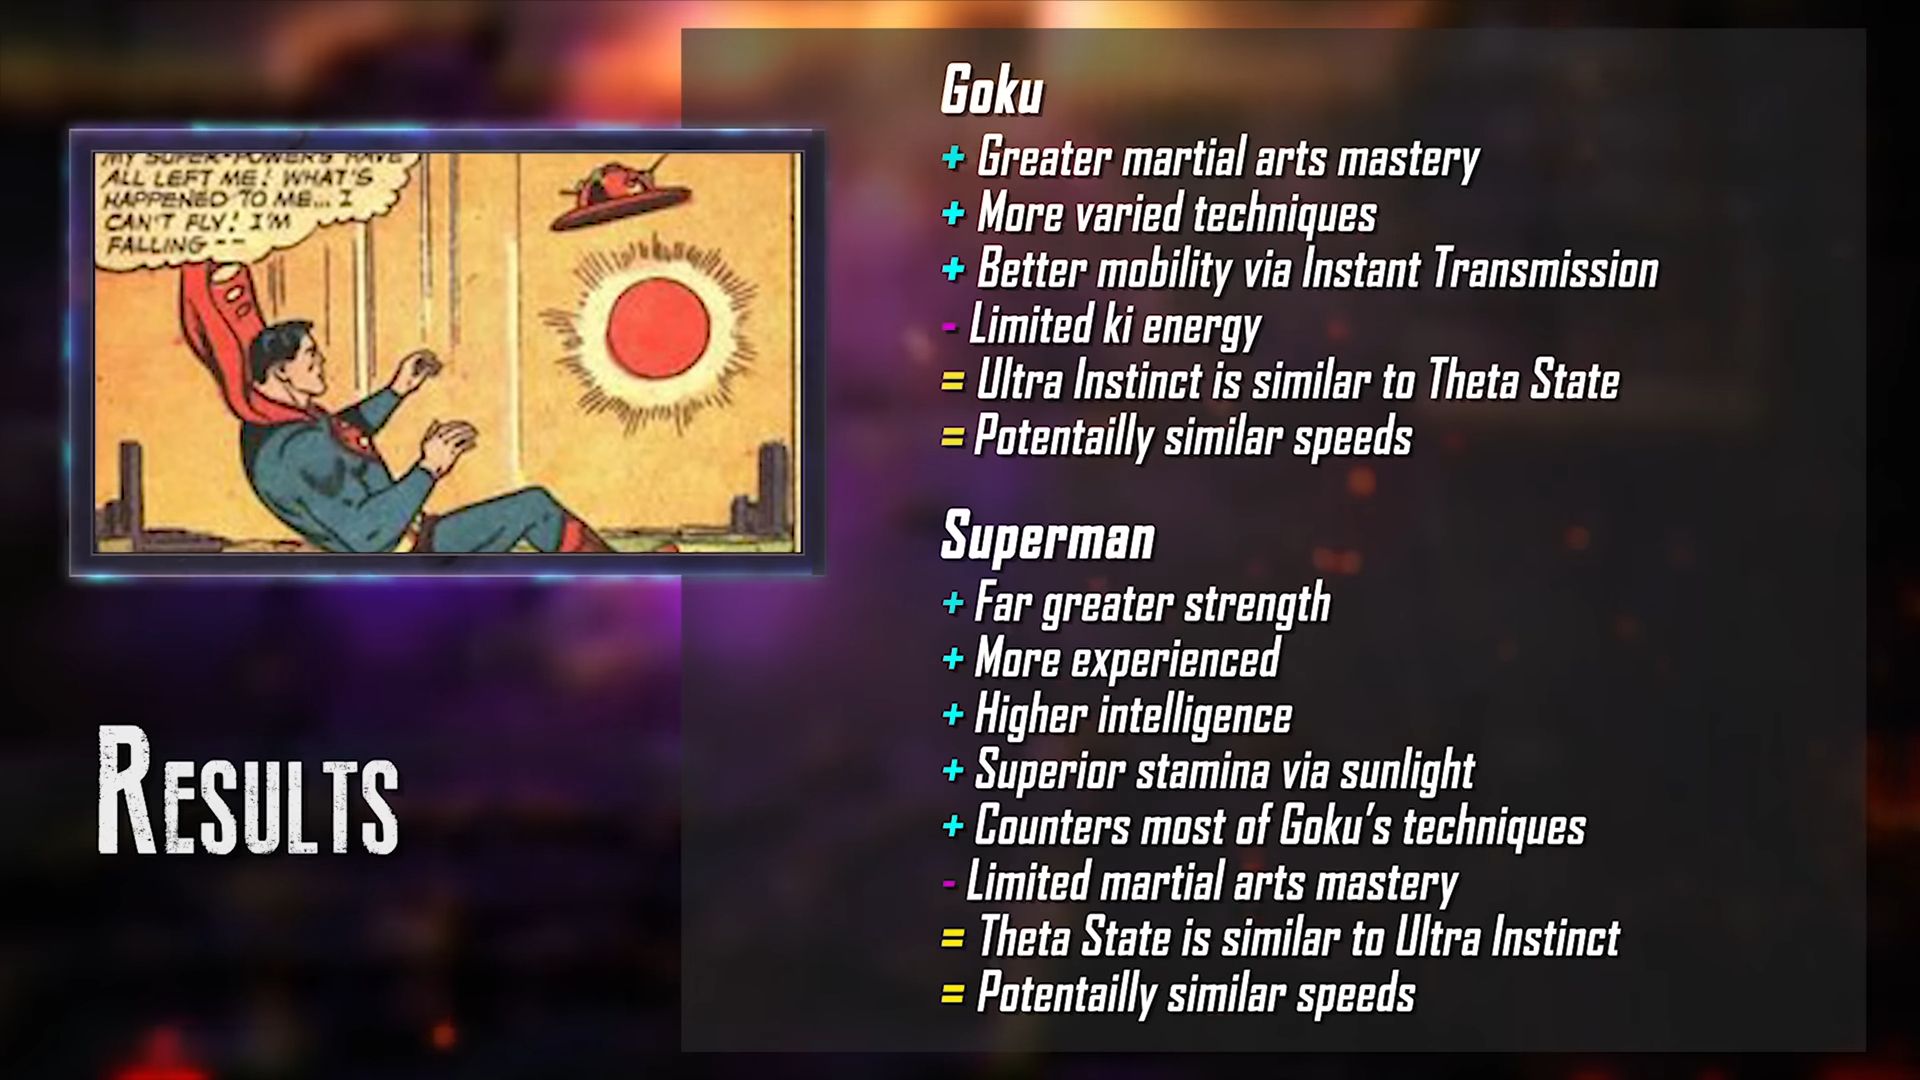 Screenshot from Death Battles stats for the Goku vs Superman fight's stats and results.